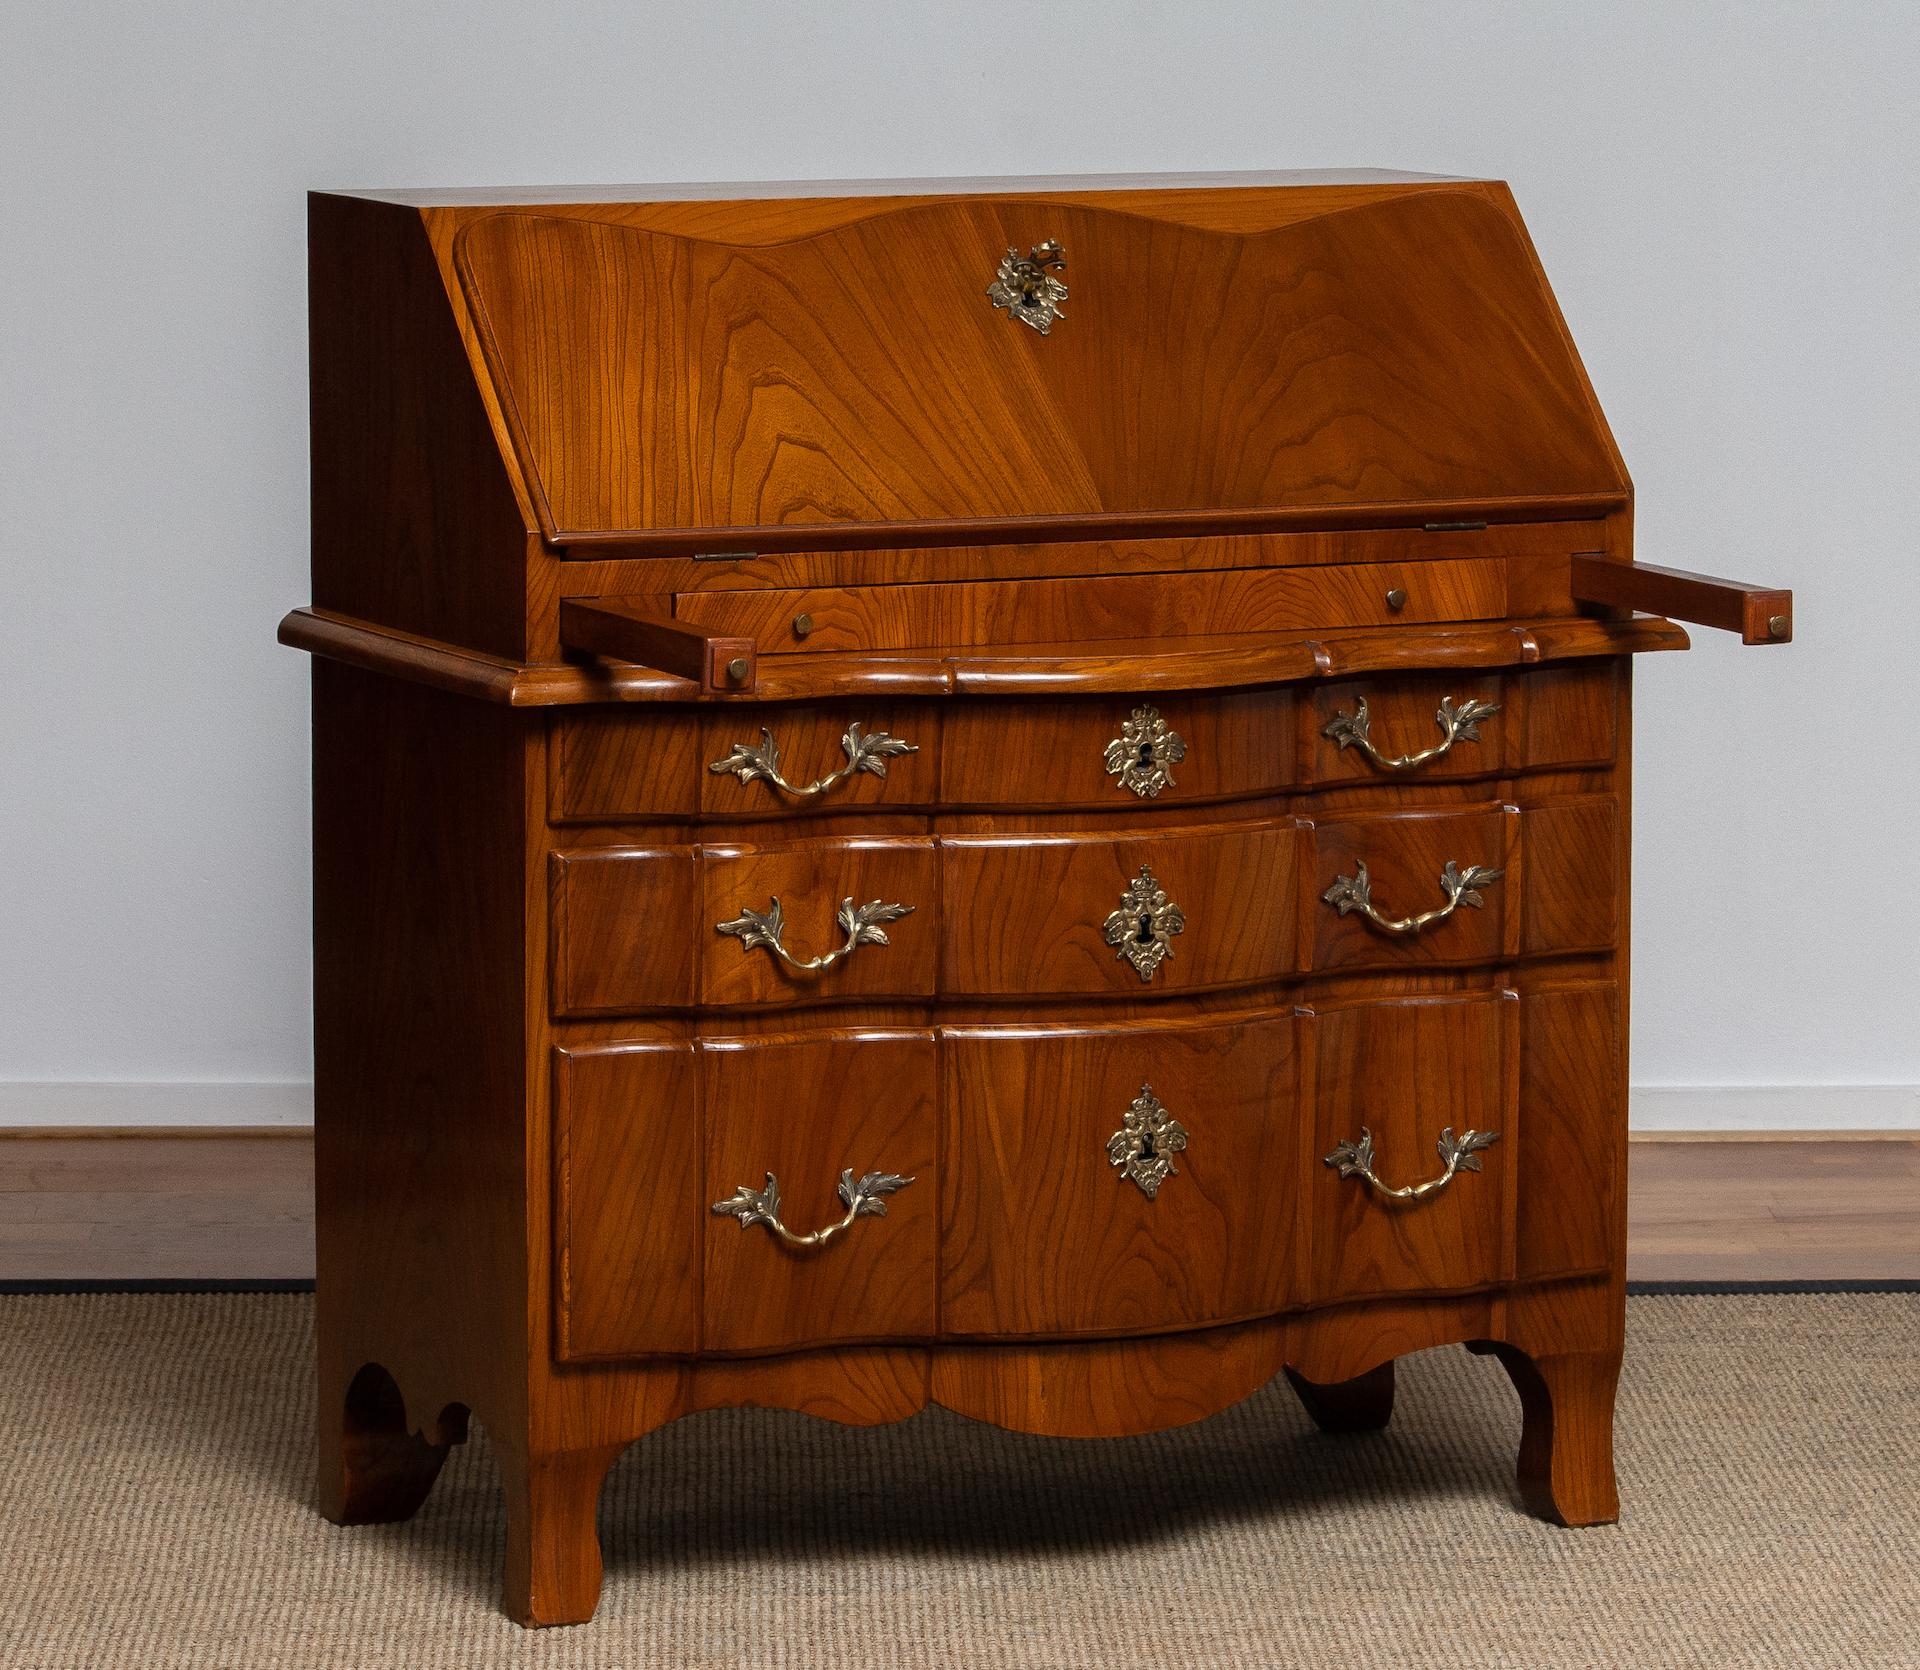 Extremely beautiful Swedish secrétaire from the end of the 18th century made of pine and veneered with best quality north European cherry all in great and original condition. Originally this cabinet was made for a Duke's or duchess house.
All